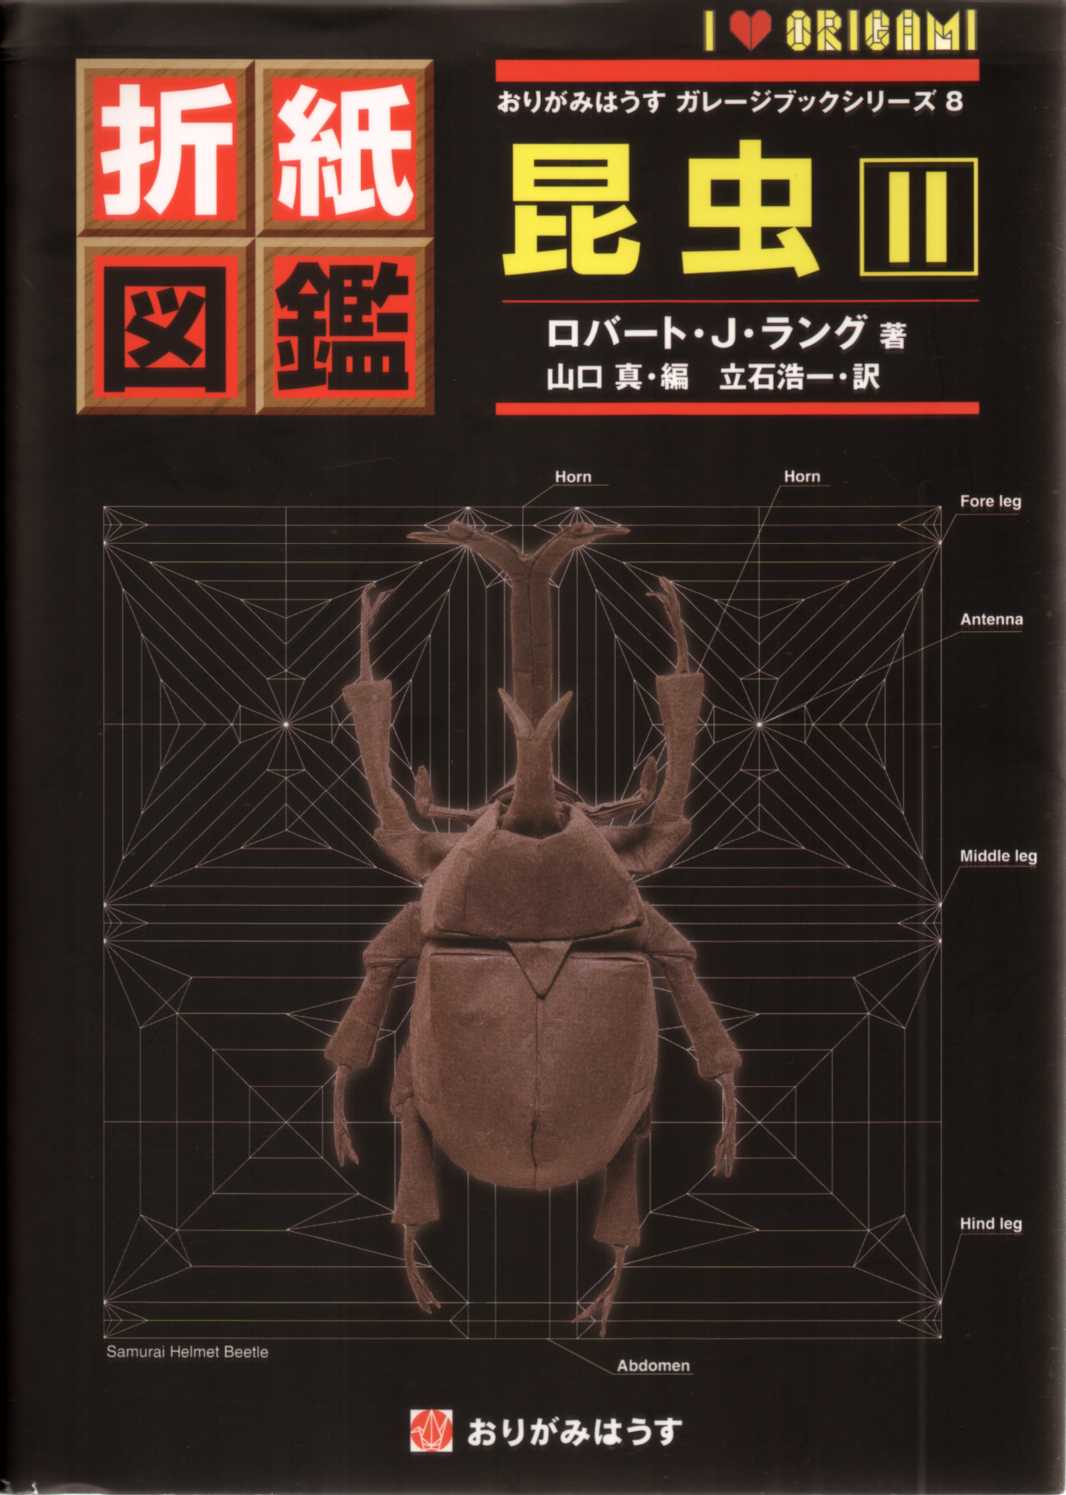 Origami Insects II / 折紙図鑑　昆虫・2 : page 31.